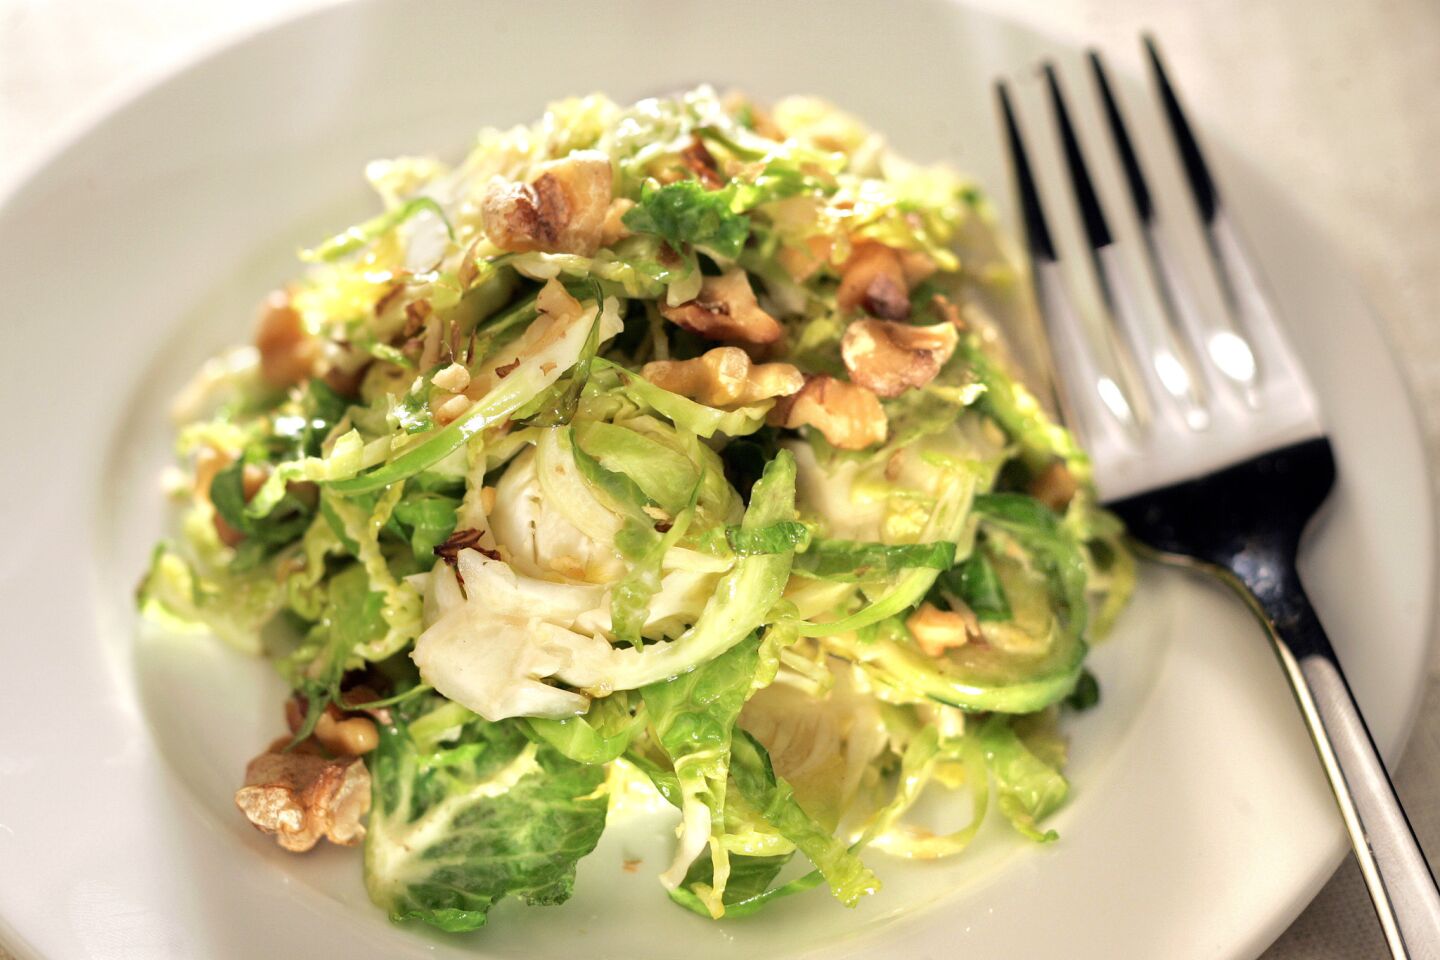 Gentle heating brings out Brussels sprouts' sweet flavor. Recipe: Wilted Brussels sprouts with walnuts